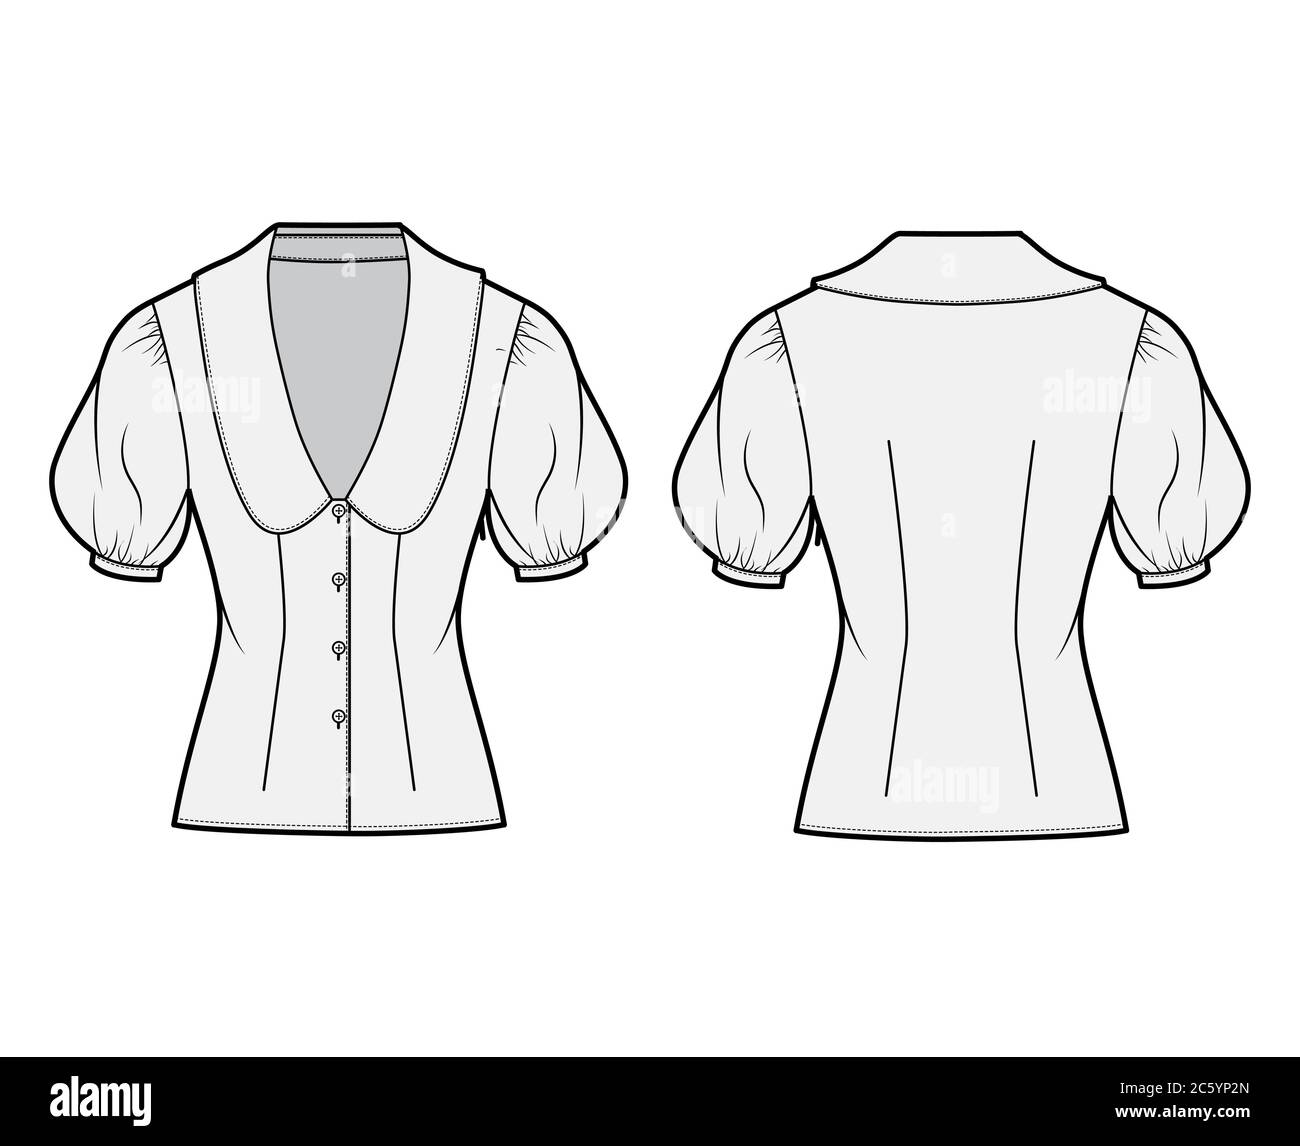 Blouse technical fashion illustration with collar framing the plunging ...